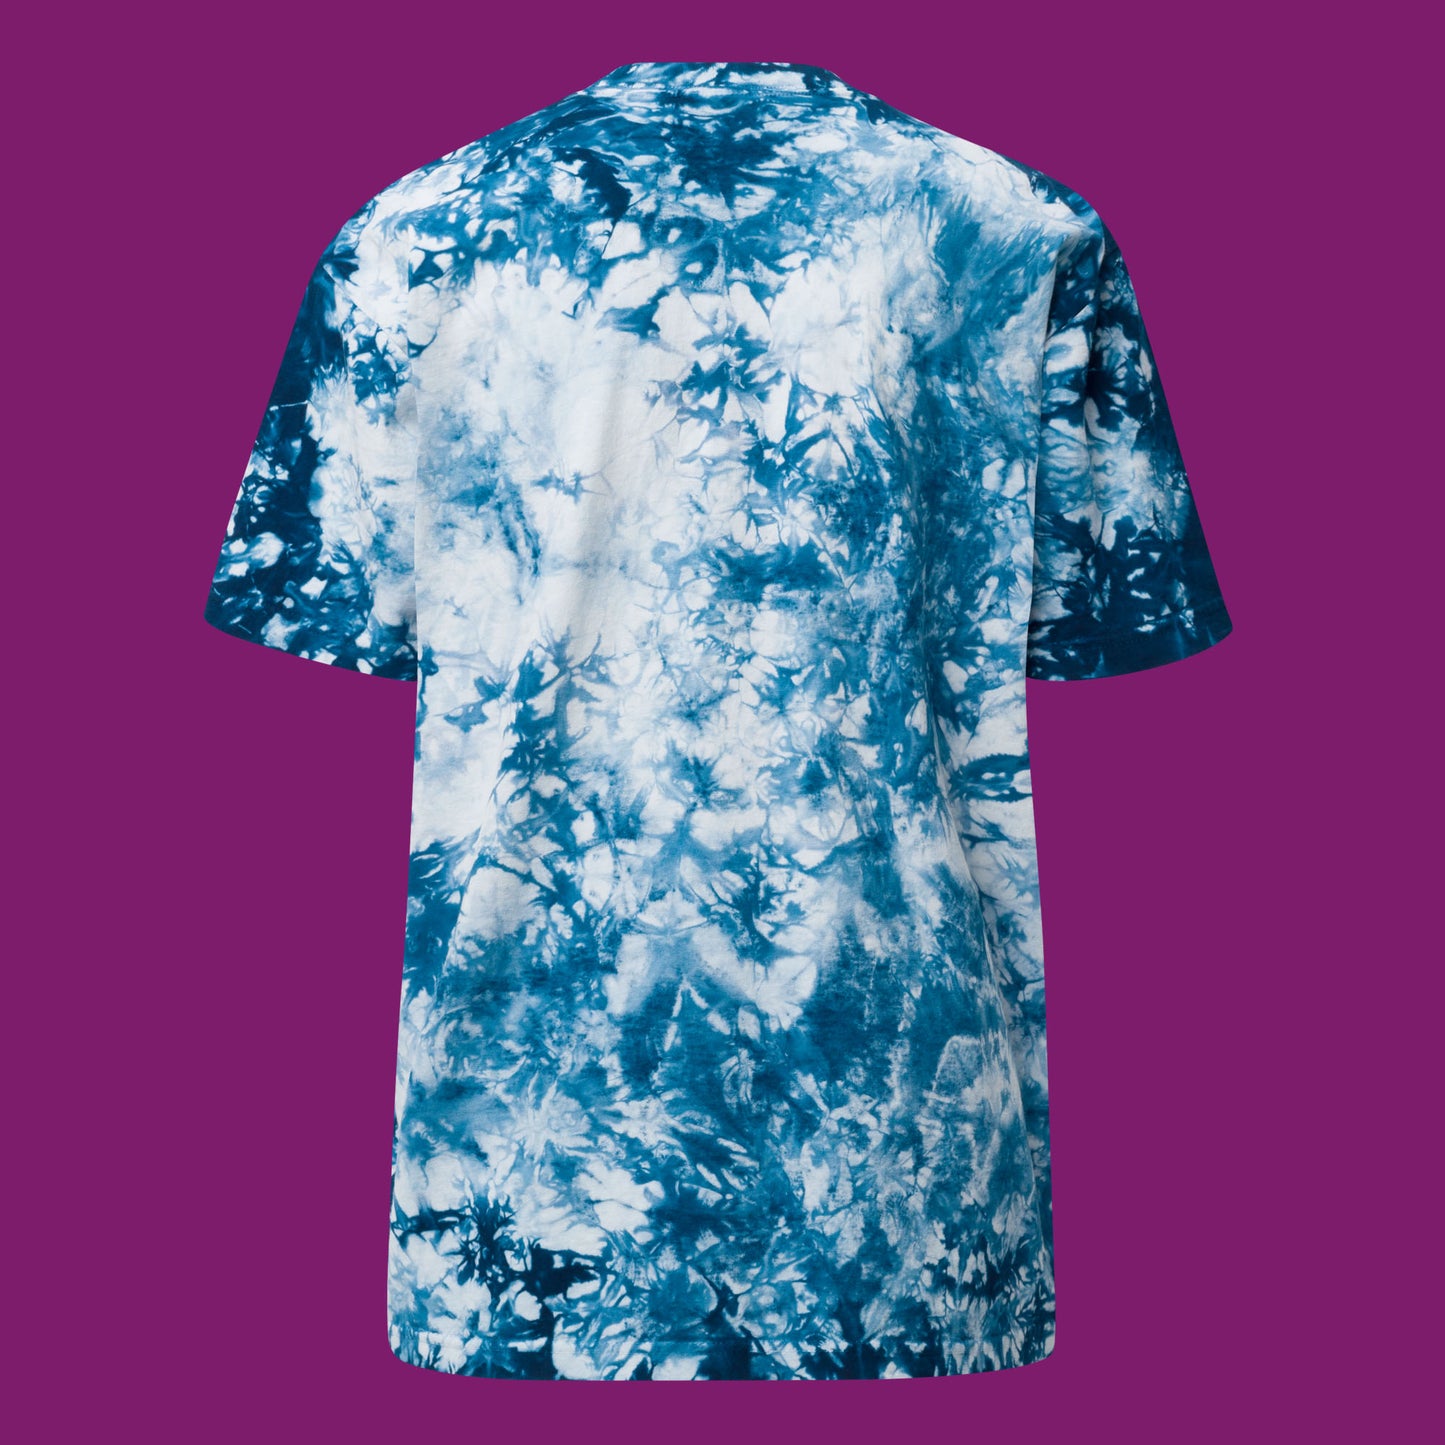 »Prince« – Oversized Tie-Dye T-Shirt | Blue Embroidery